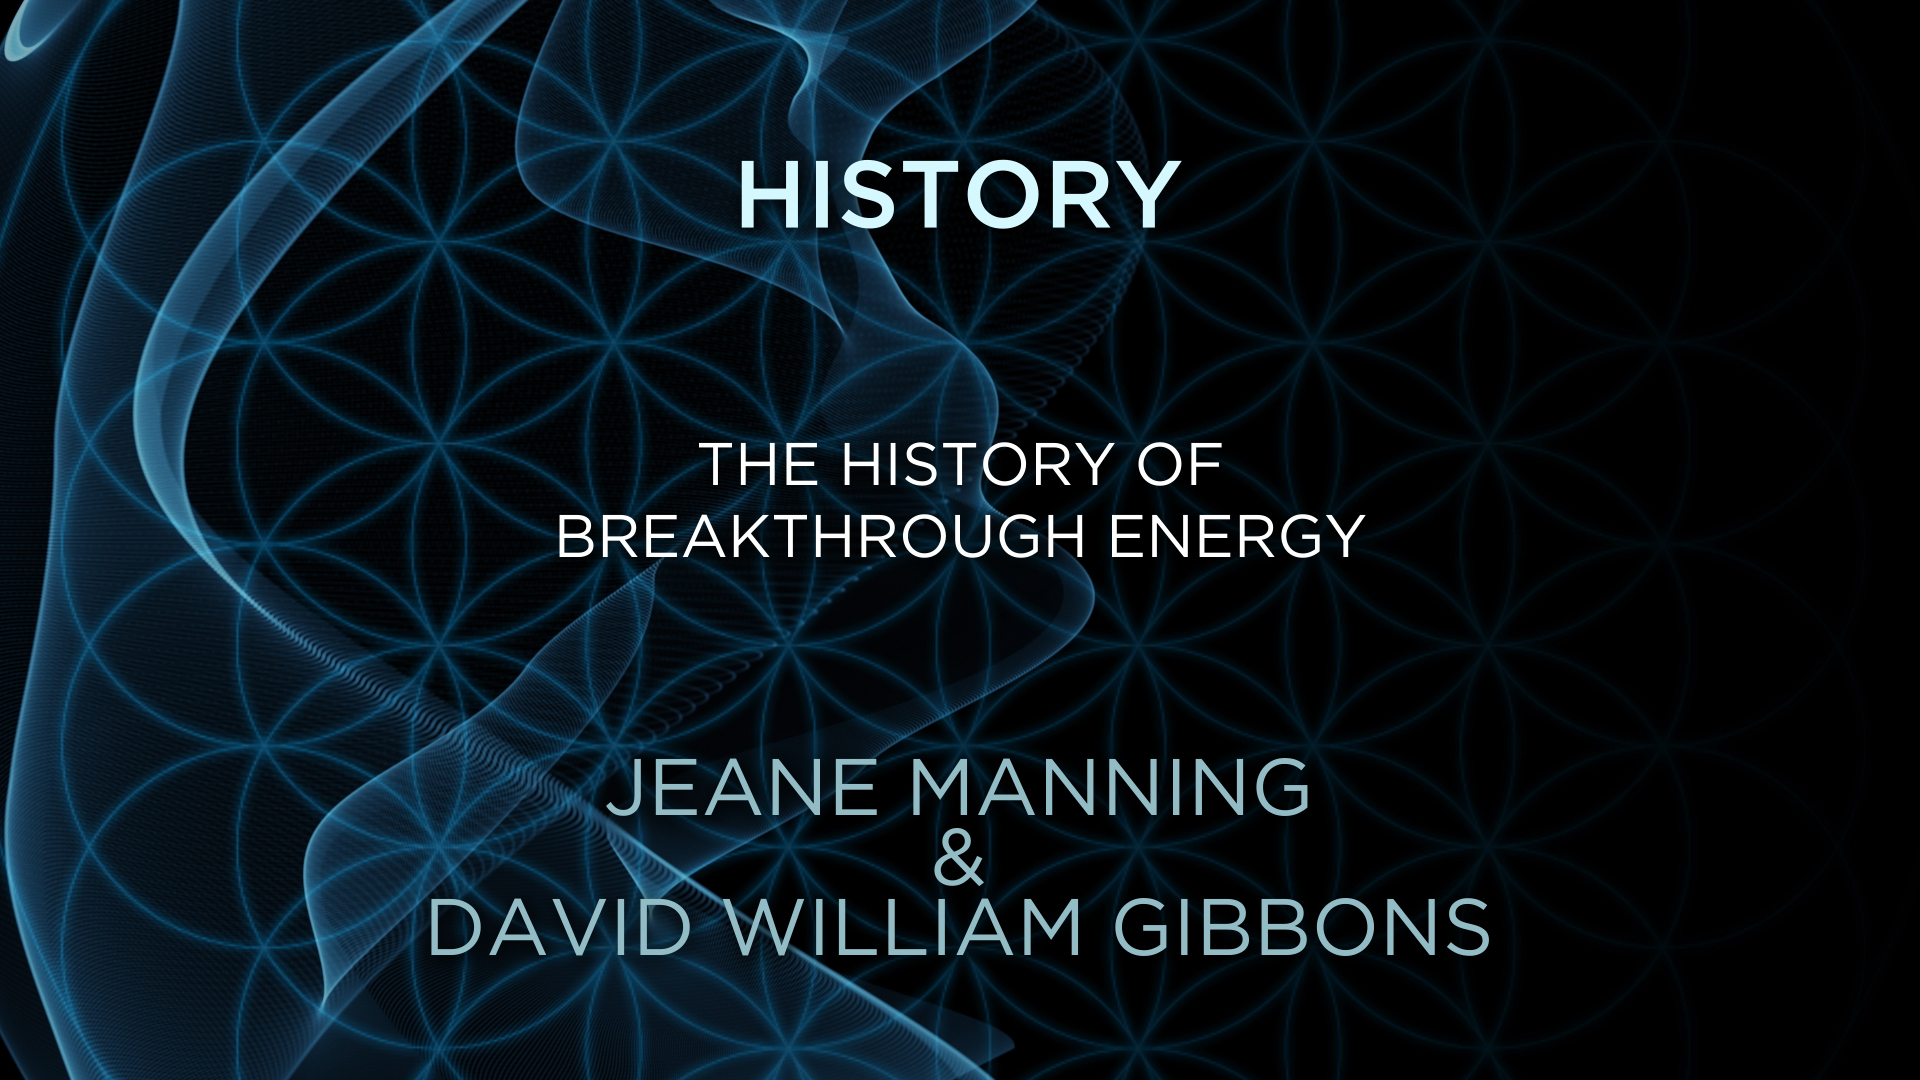 David William Gibbons and Jeane Manning – History of Breakthrough Energy